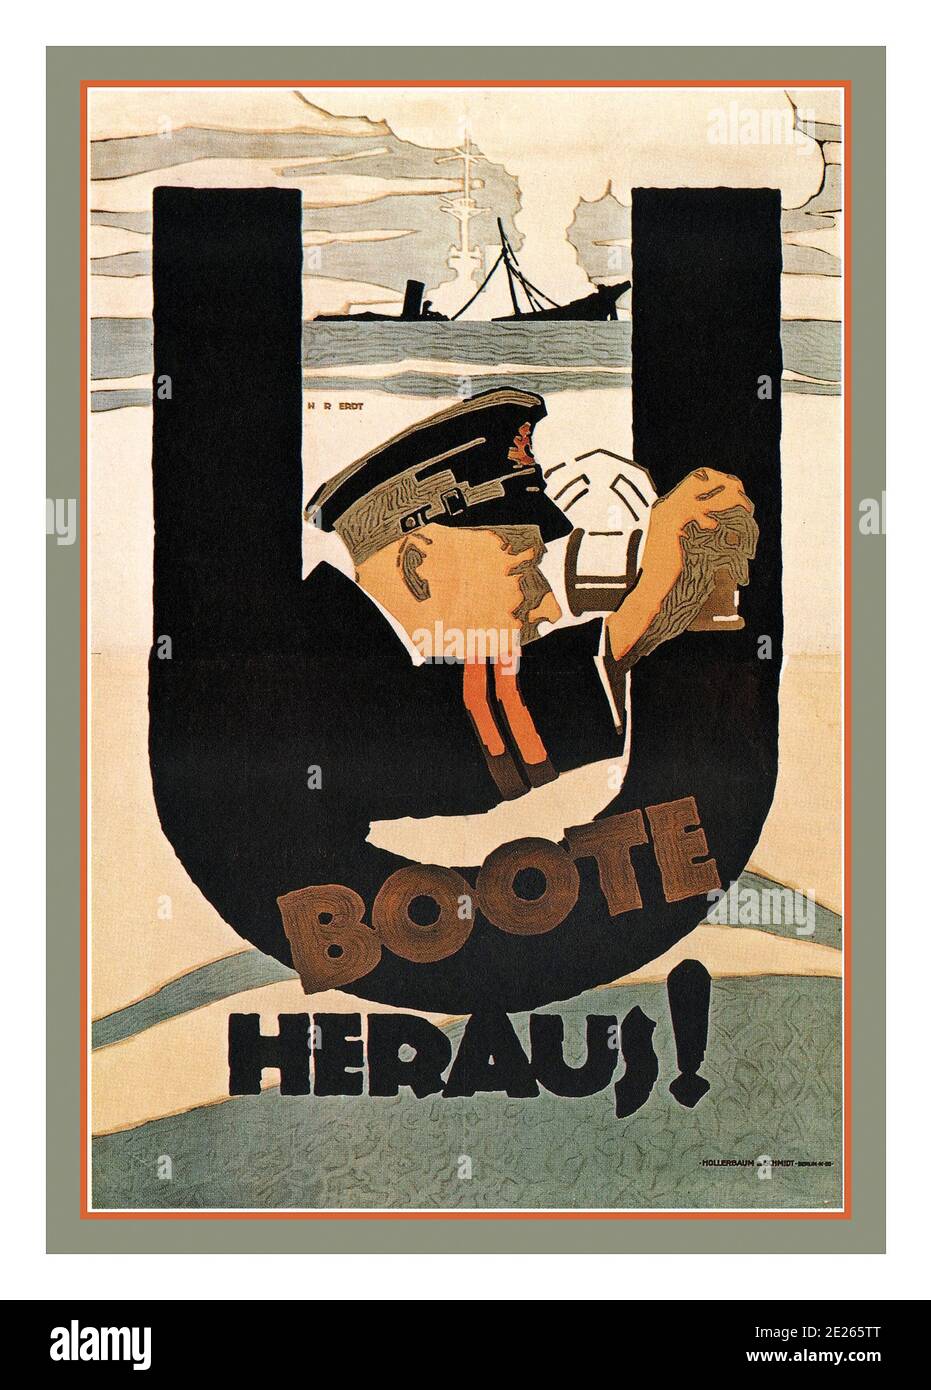 U Boat Poster 'Boote Heraus' ! 1917 WW1 propagande allemande recrutement affiche pour U Boats 'U Boats Out!' Sous-marin Unterseeboat première Guerre mondiale 'Boote Heraus !' Banque D'Images